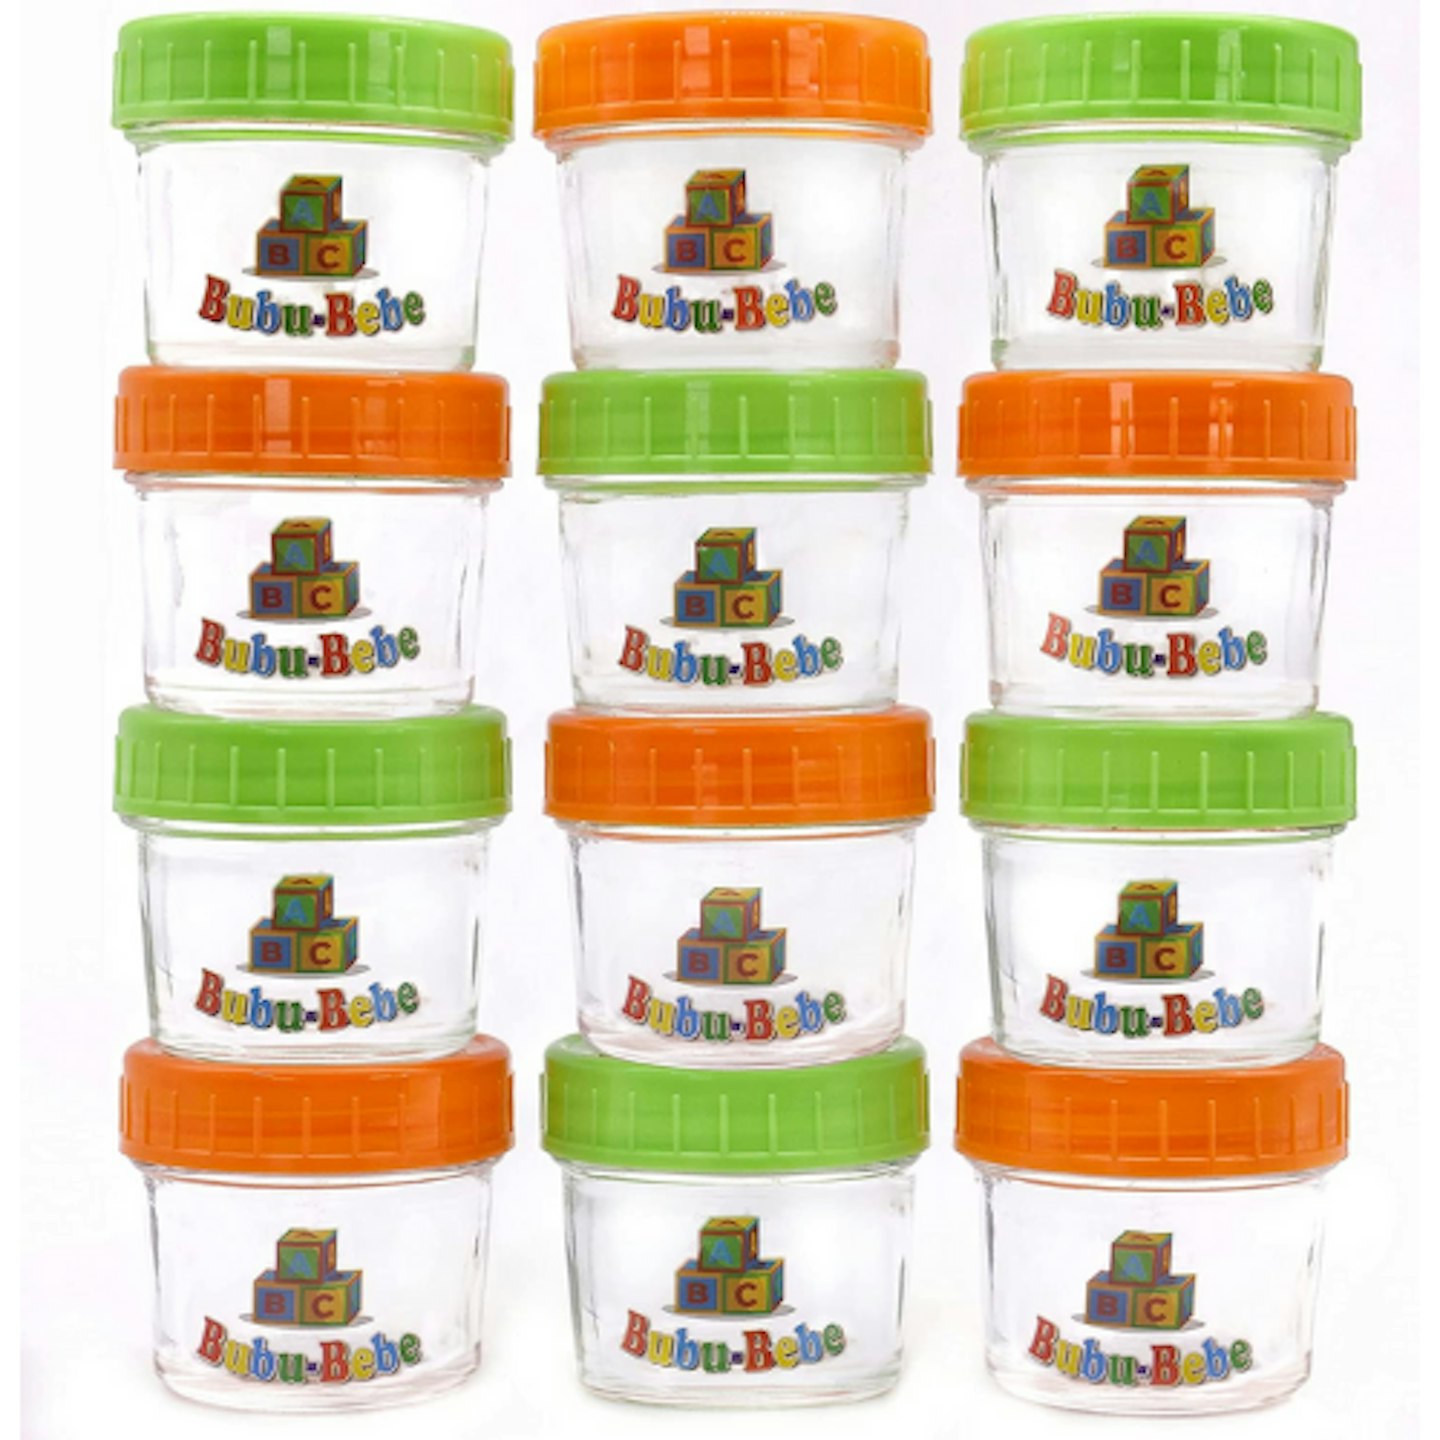 ABC Bubu-Bebe Glass Baby Food Storage Containers